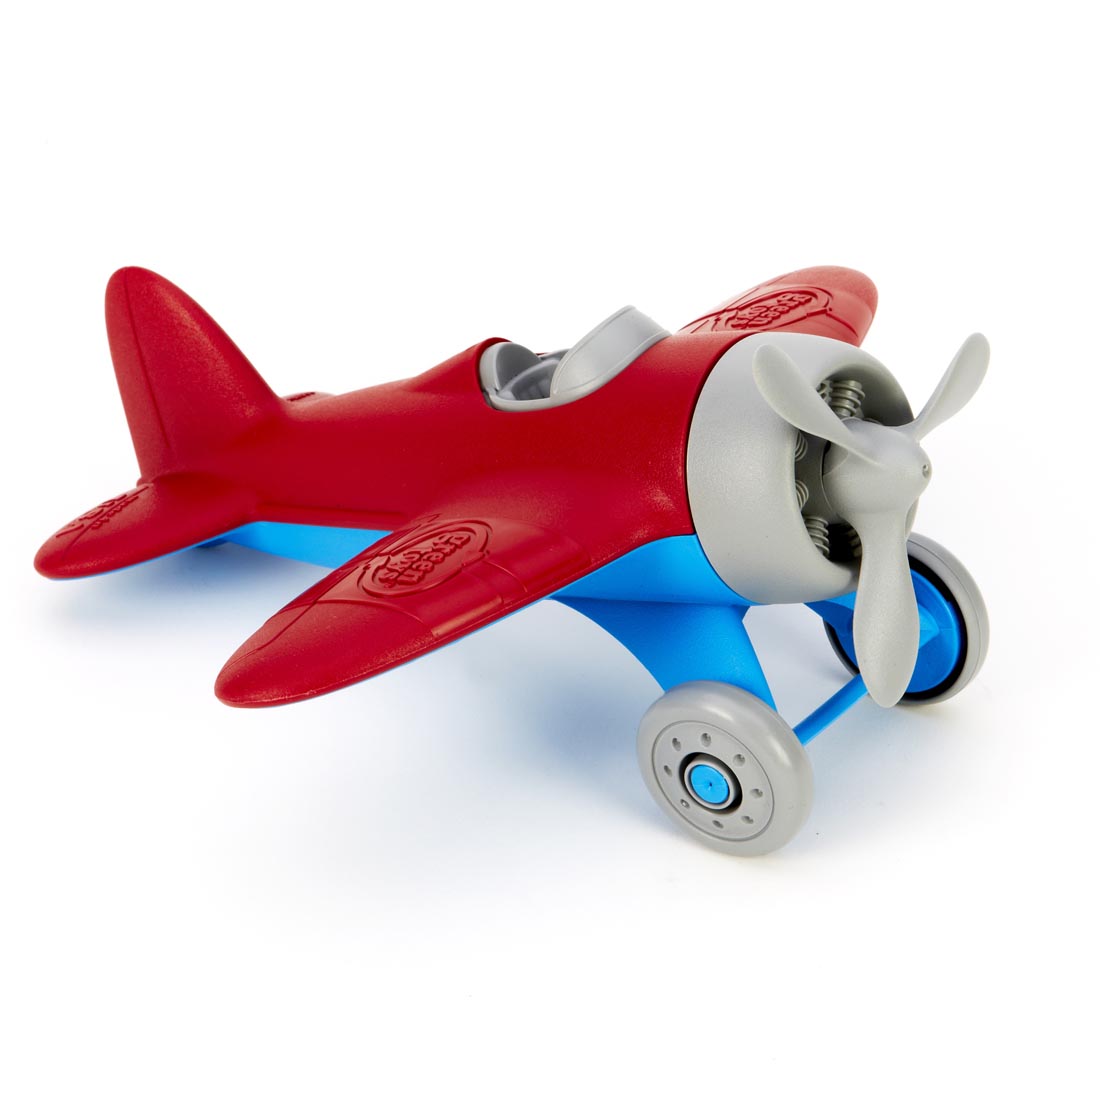 Red and blue recycled plastic Green Toys Airplane